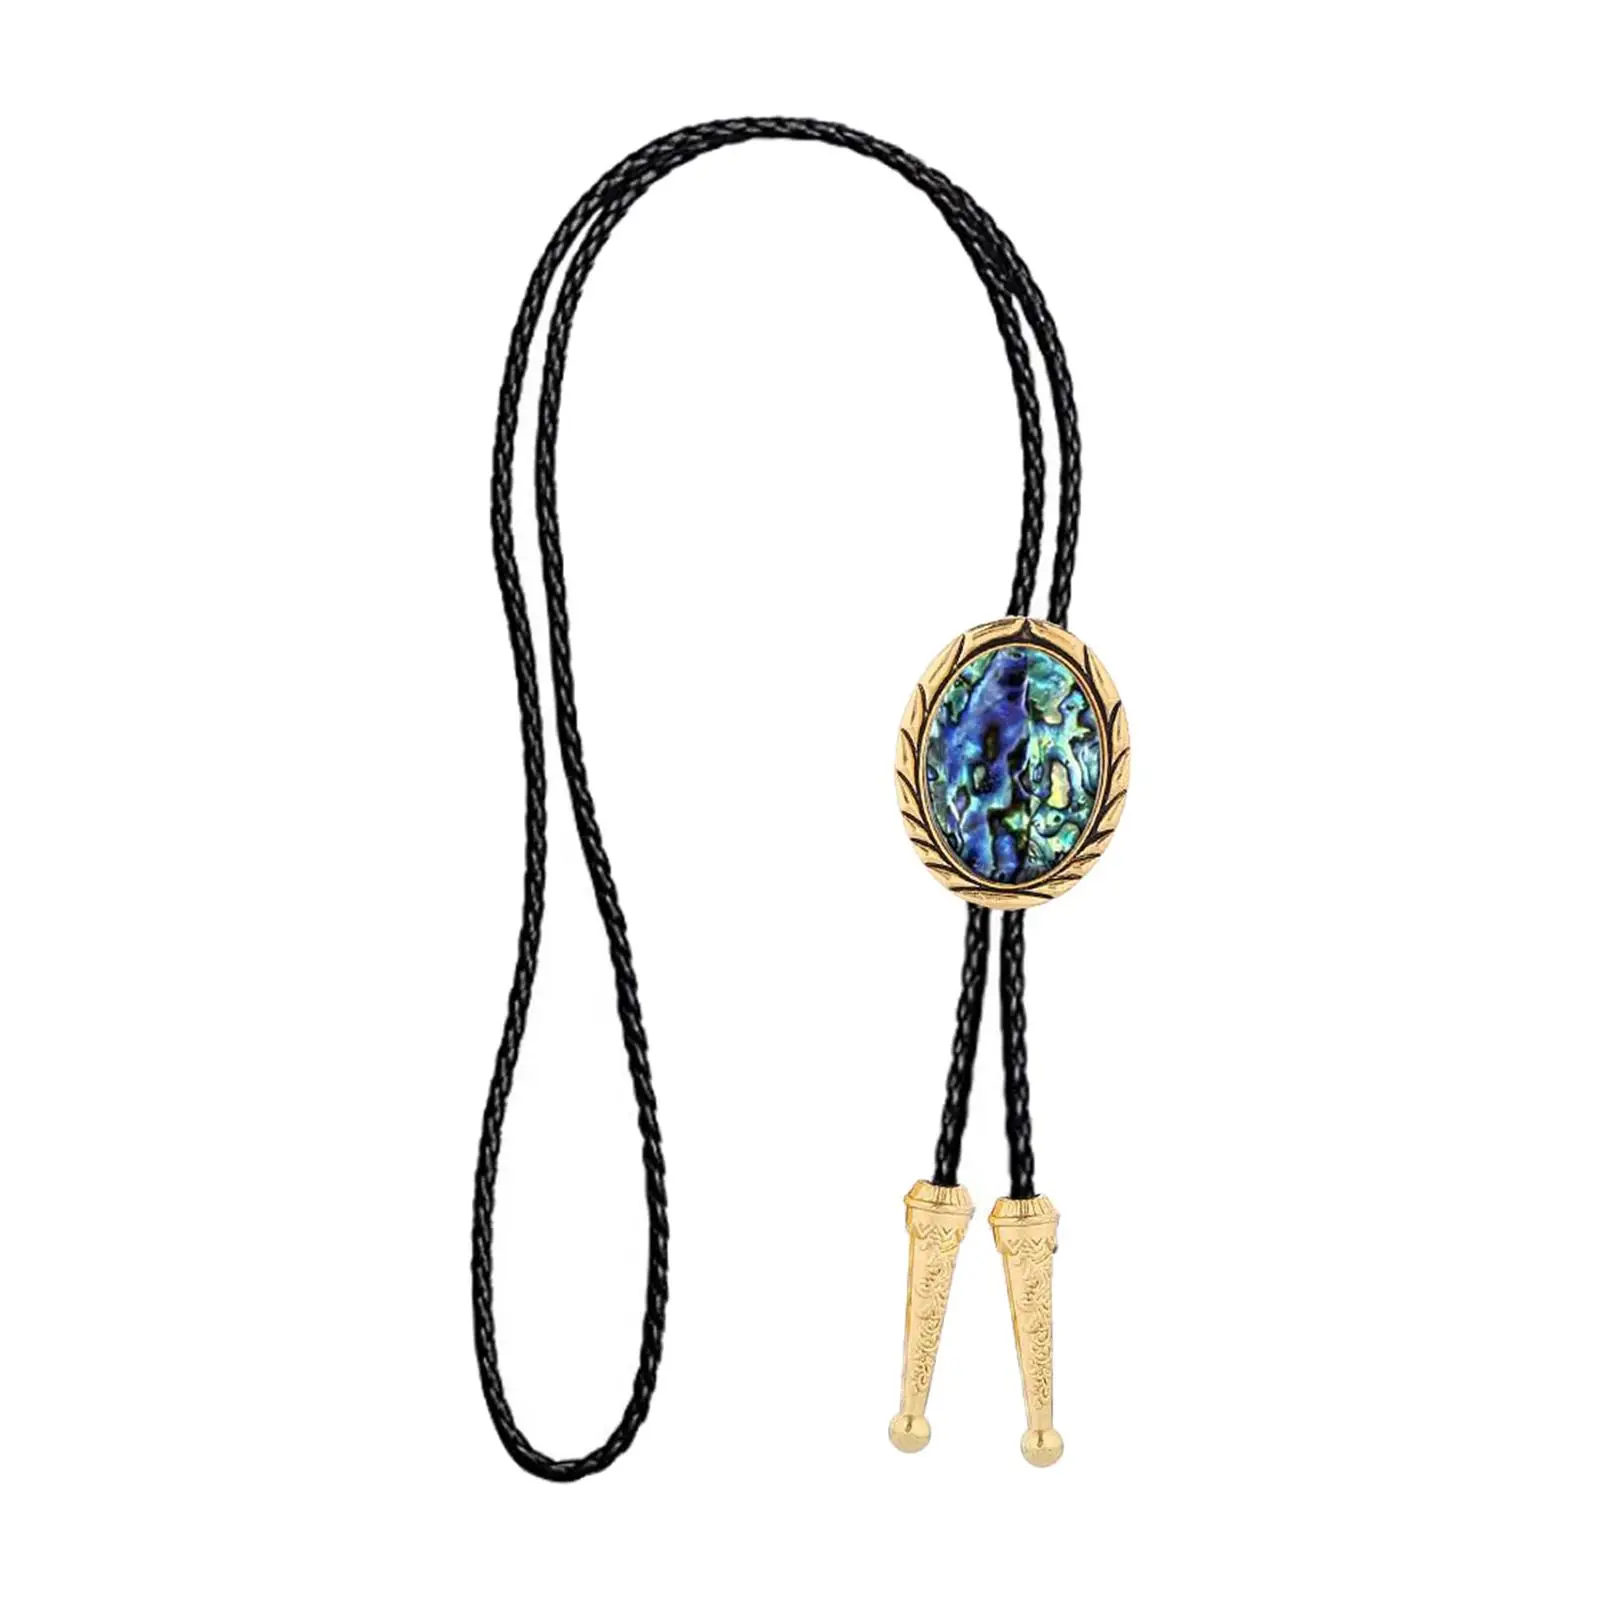 Bolo Tie PU Leather Rope Costume Jewelry Necklace Tie Fashion for Party Prom